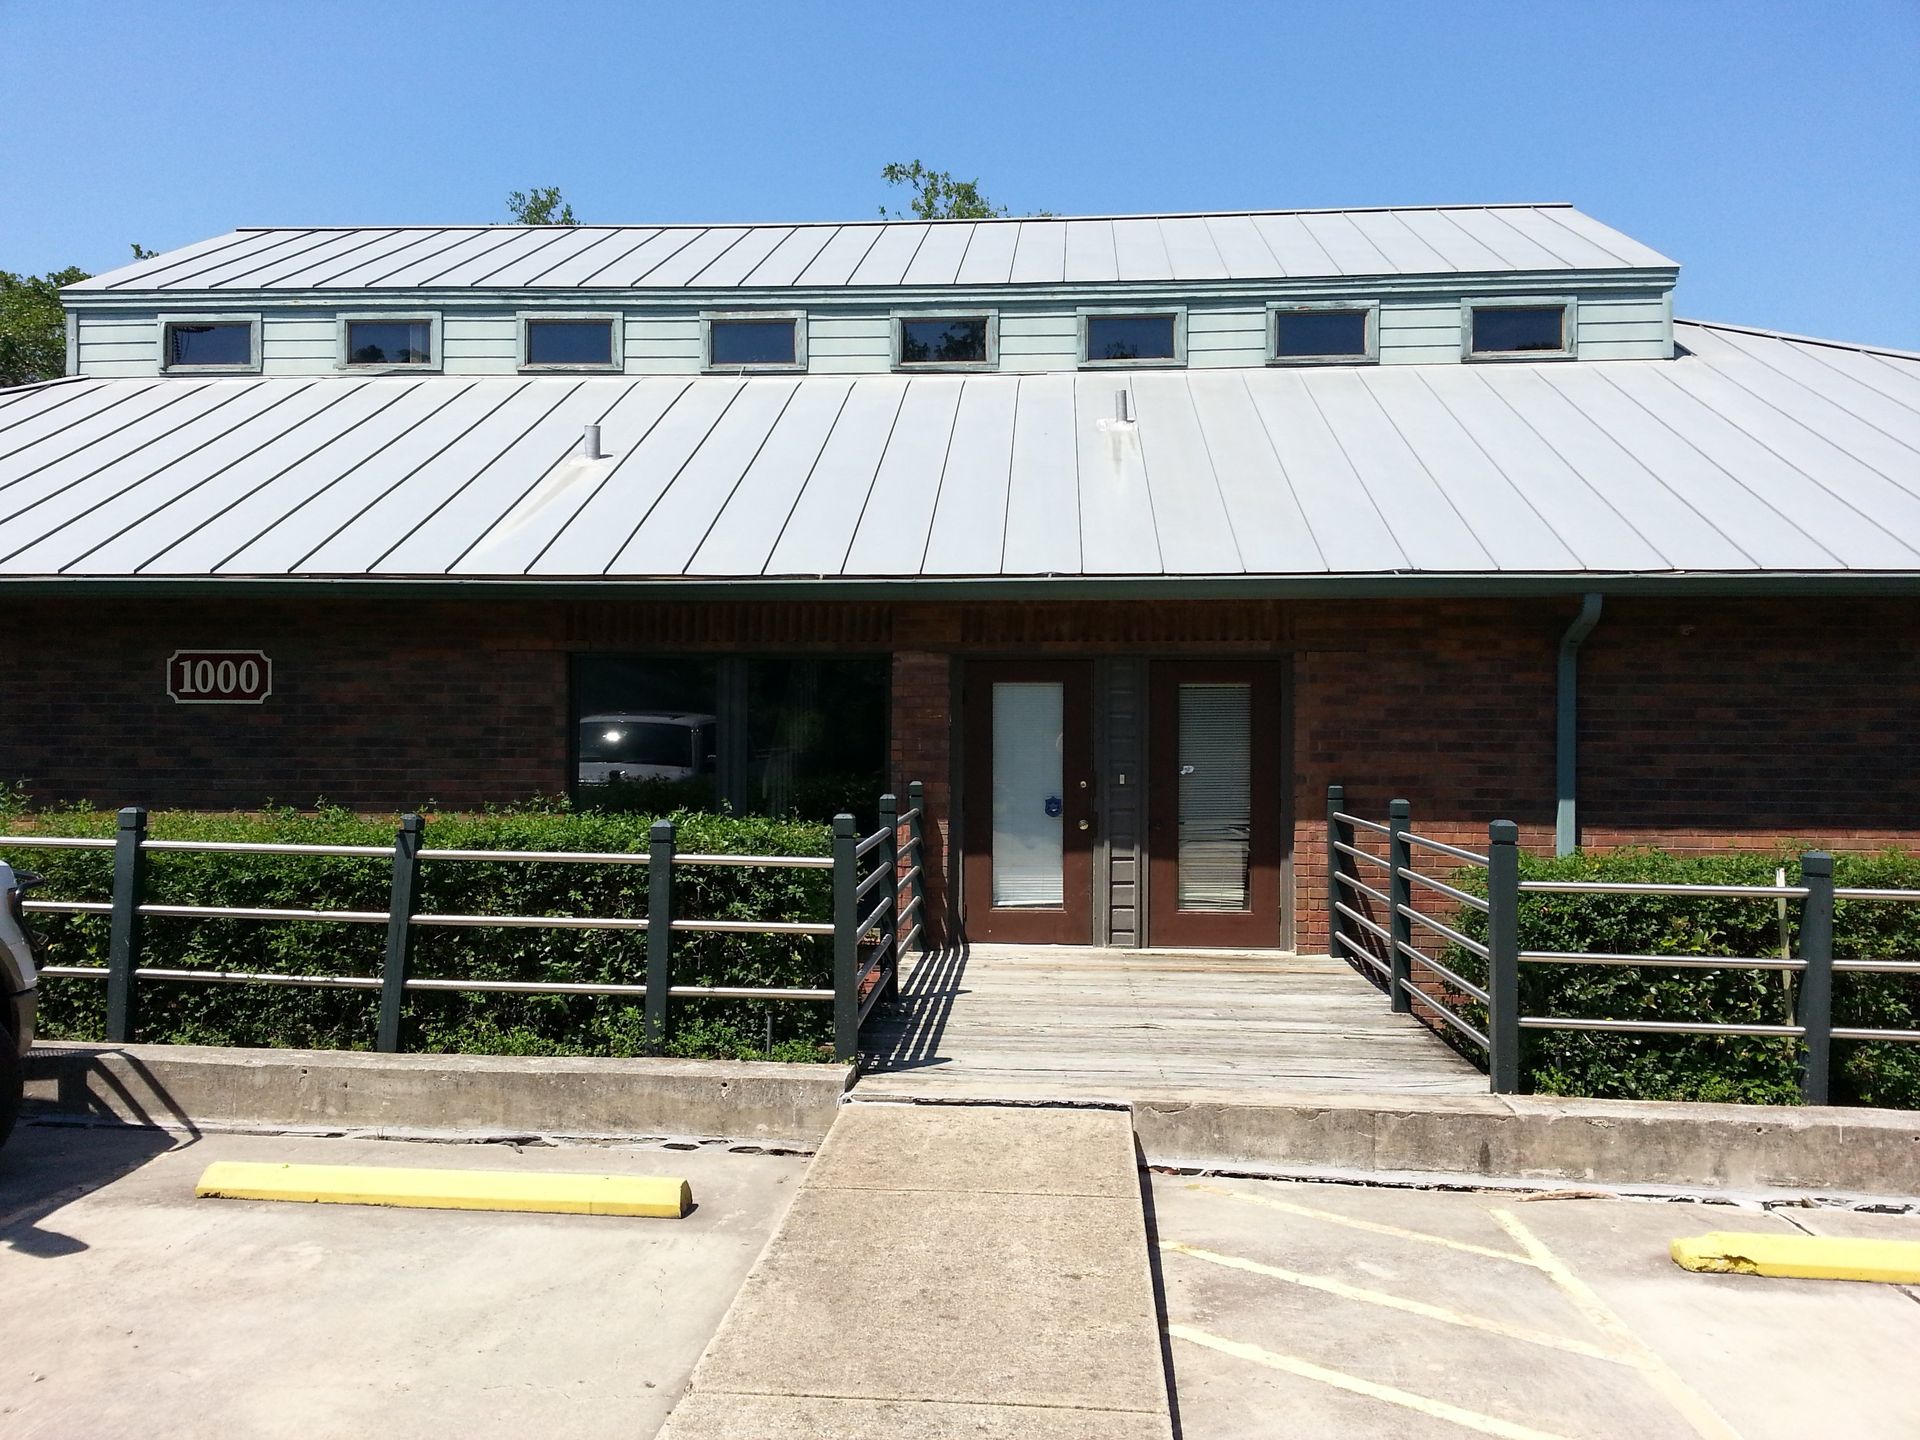 Commercial Metal Roof Austin Roofing and Construction